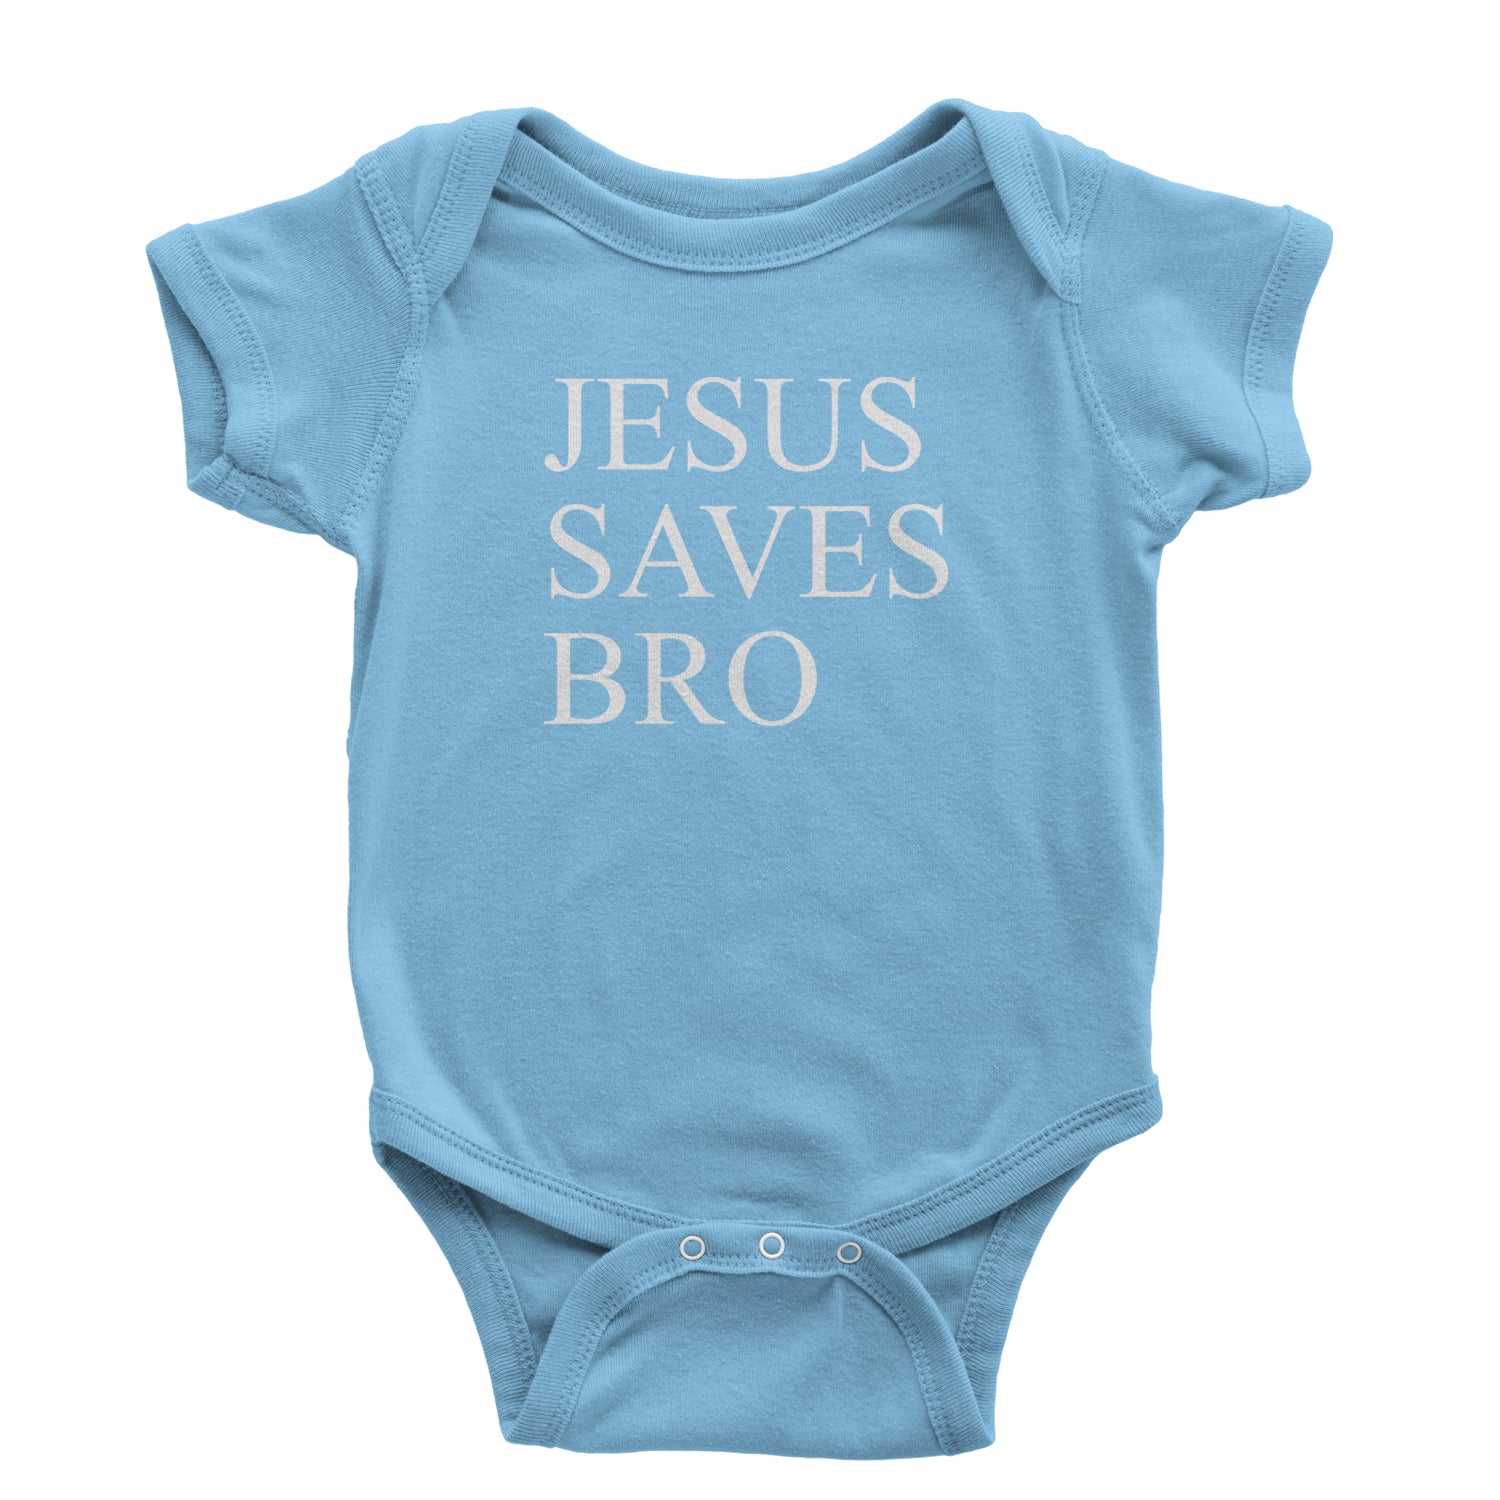 Jesus Saves Bro Infant One-Piece Romper Bodysuit and Toddler T-shirt catholic, christian, christianity, church, jesus, religion, religuous by Expression Tees